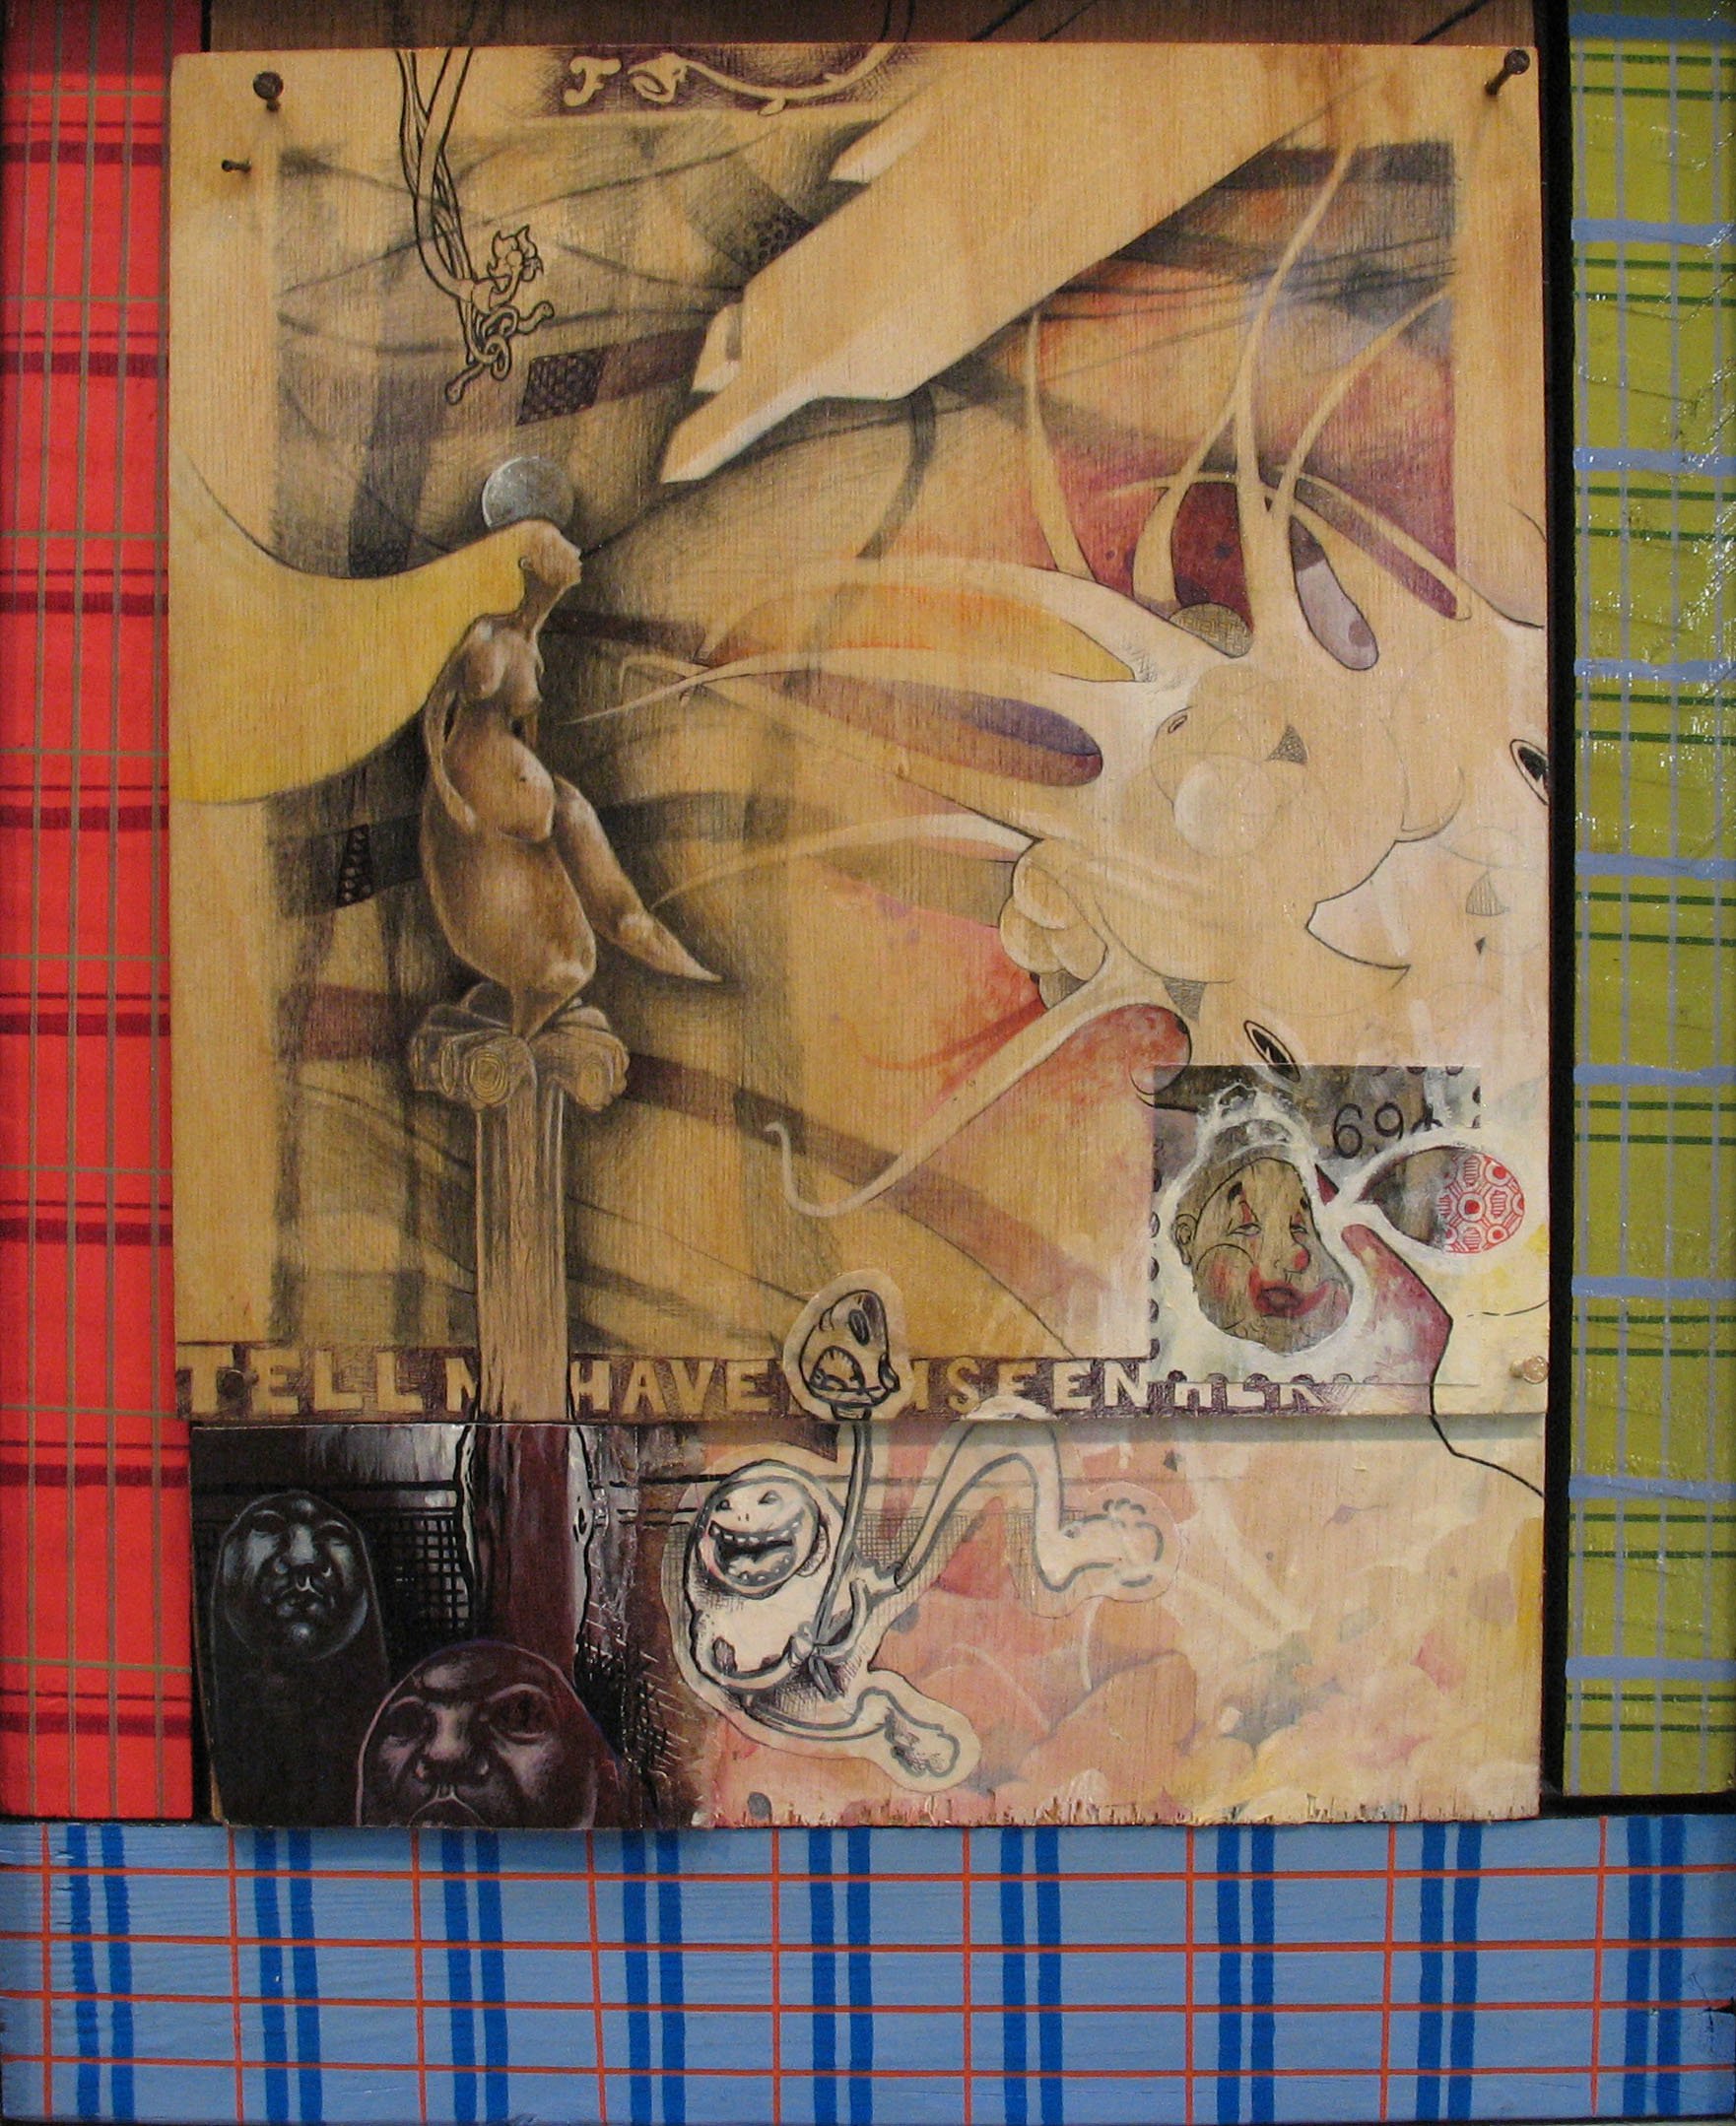   Annunciation  graphite, ink, acrylic, collage, cardboard, paper, watercolor, line etching, mezzotint, nails on wood. 2008  exhibited -  Mac B Gallery 2008  